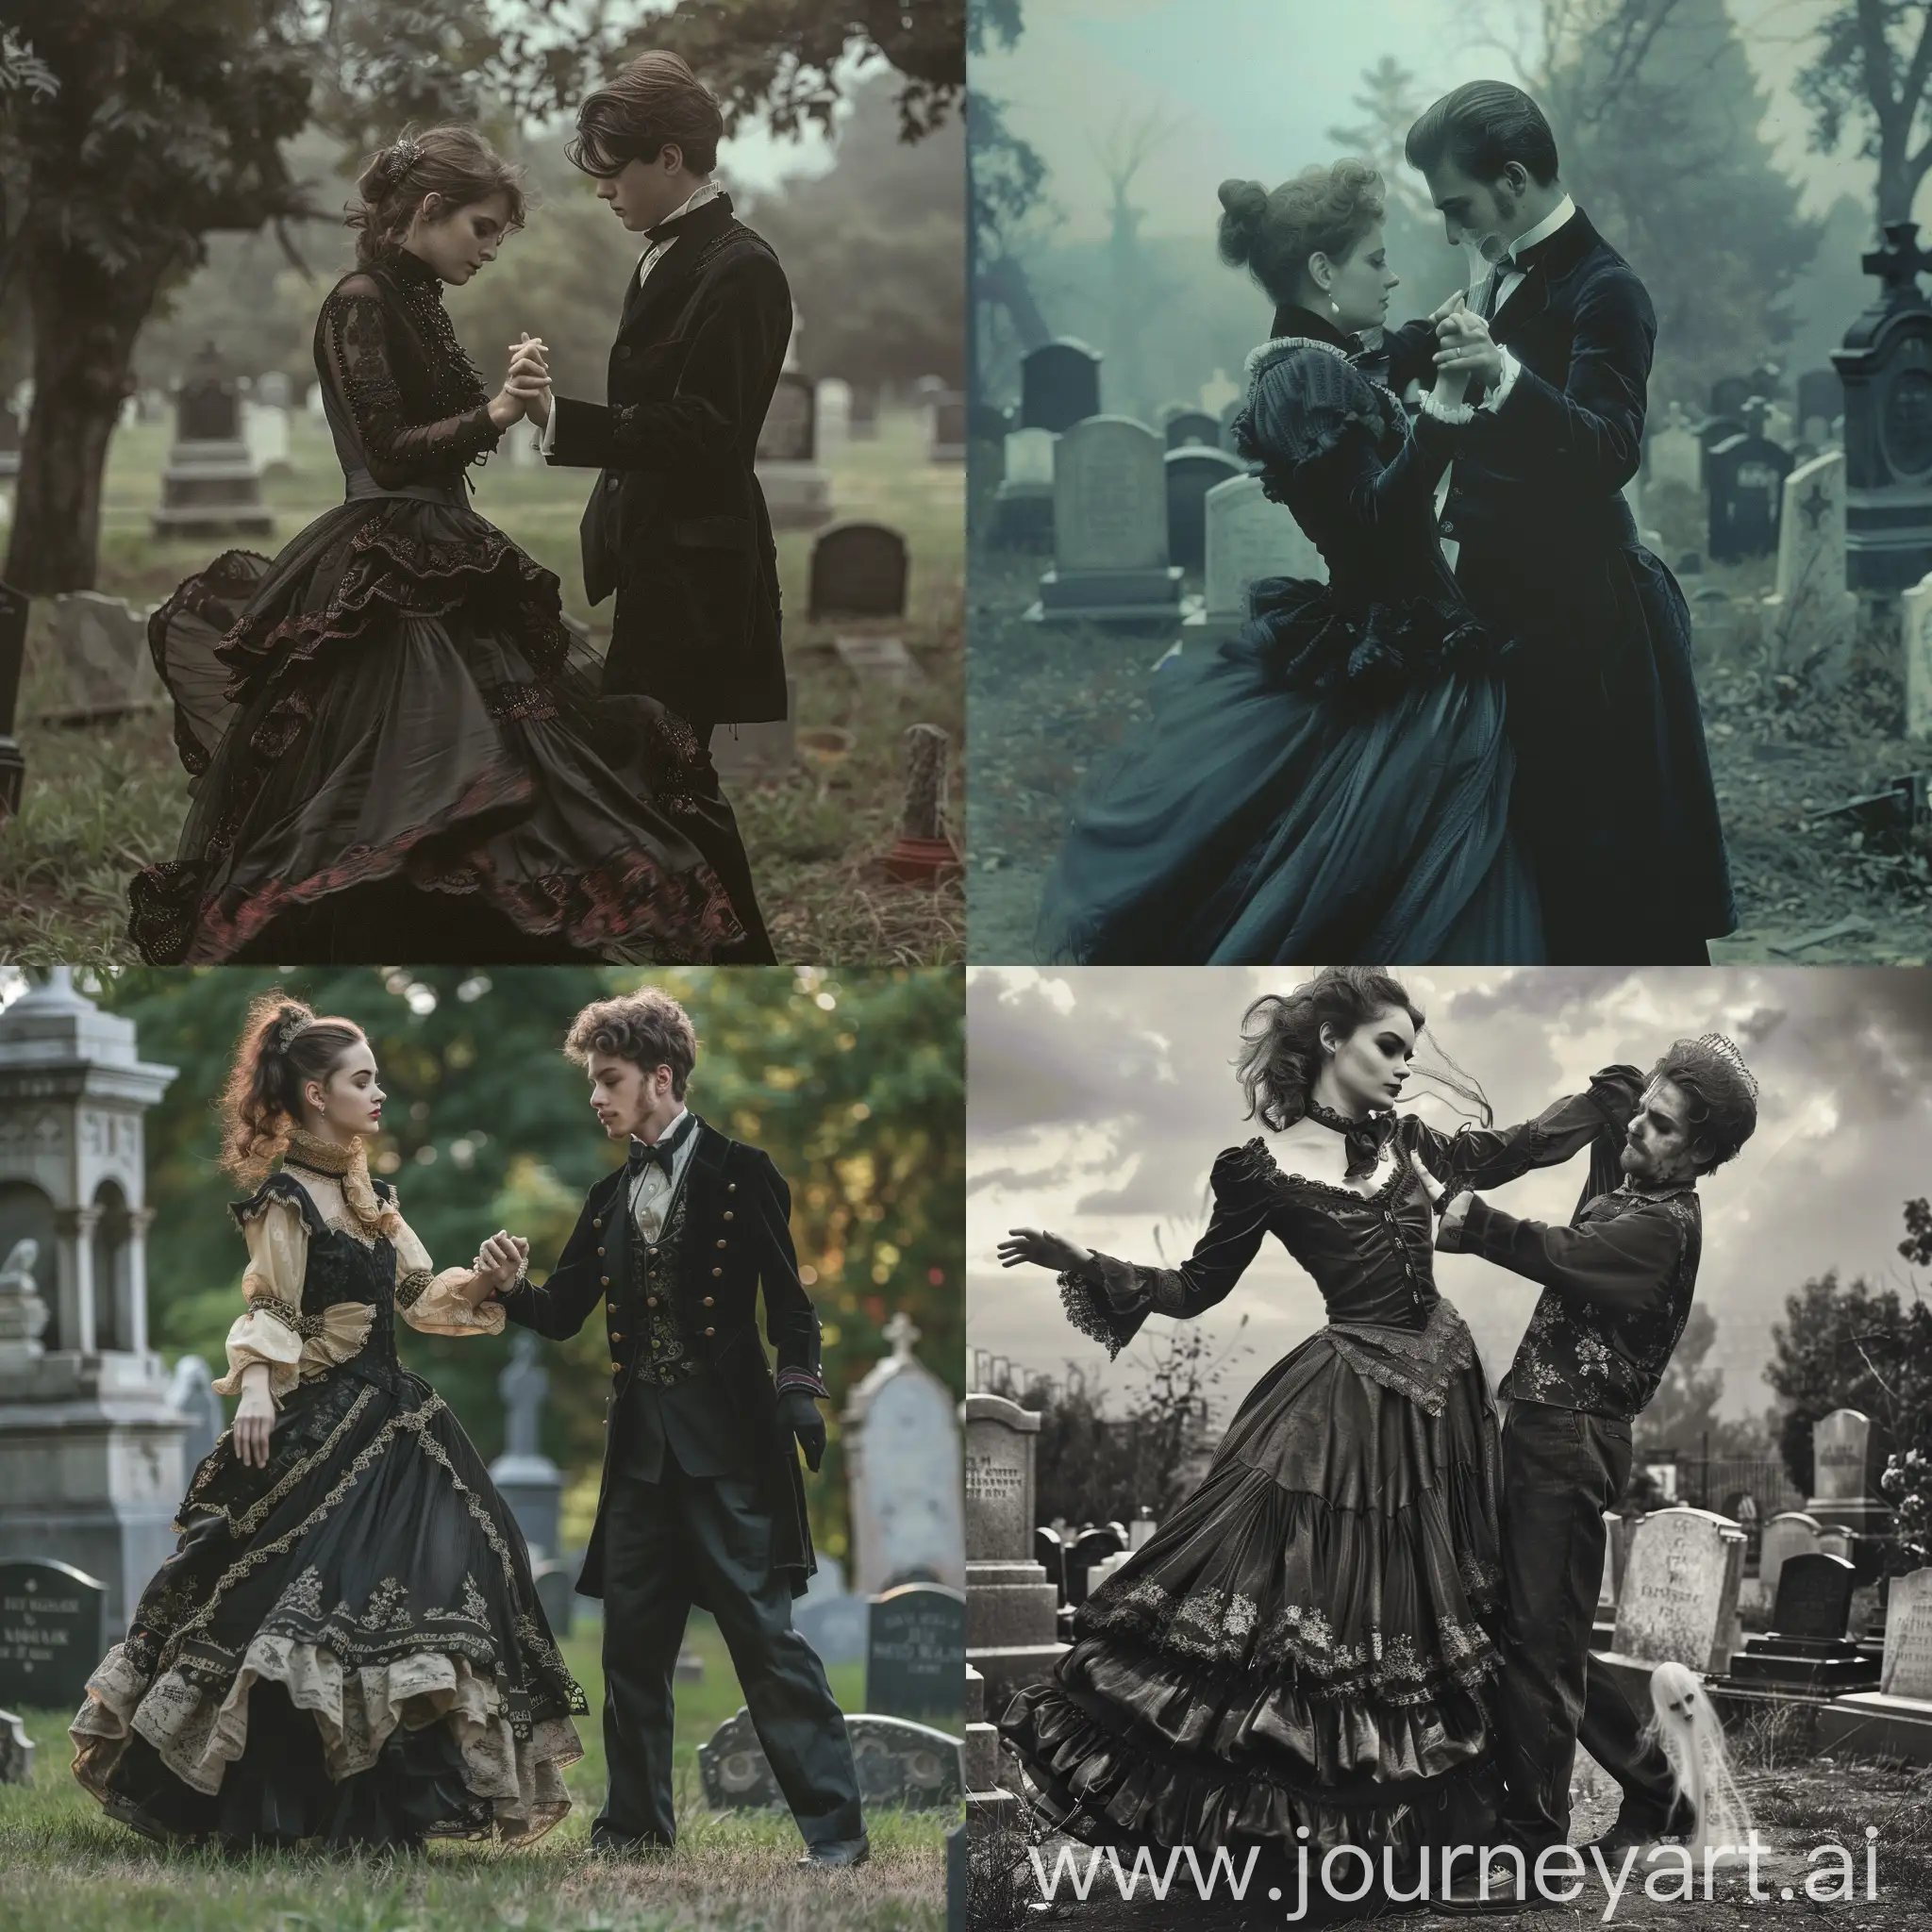 Victorian-Woman-Dancing-with-Ghostly-Man-in-Cemetery